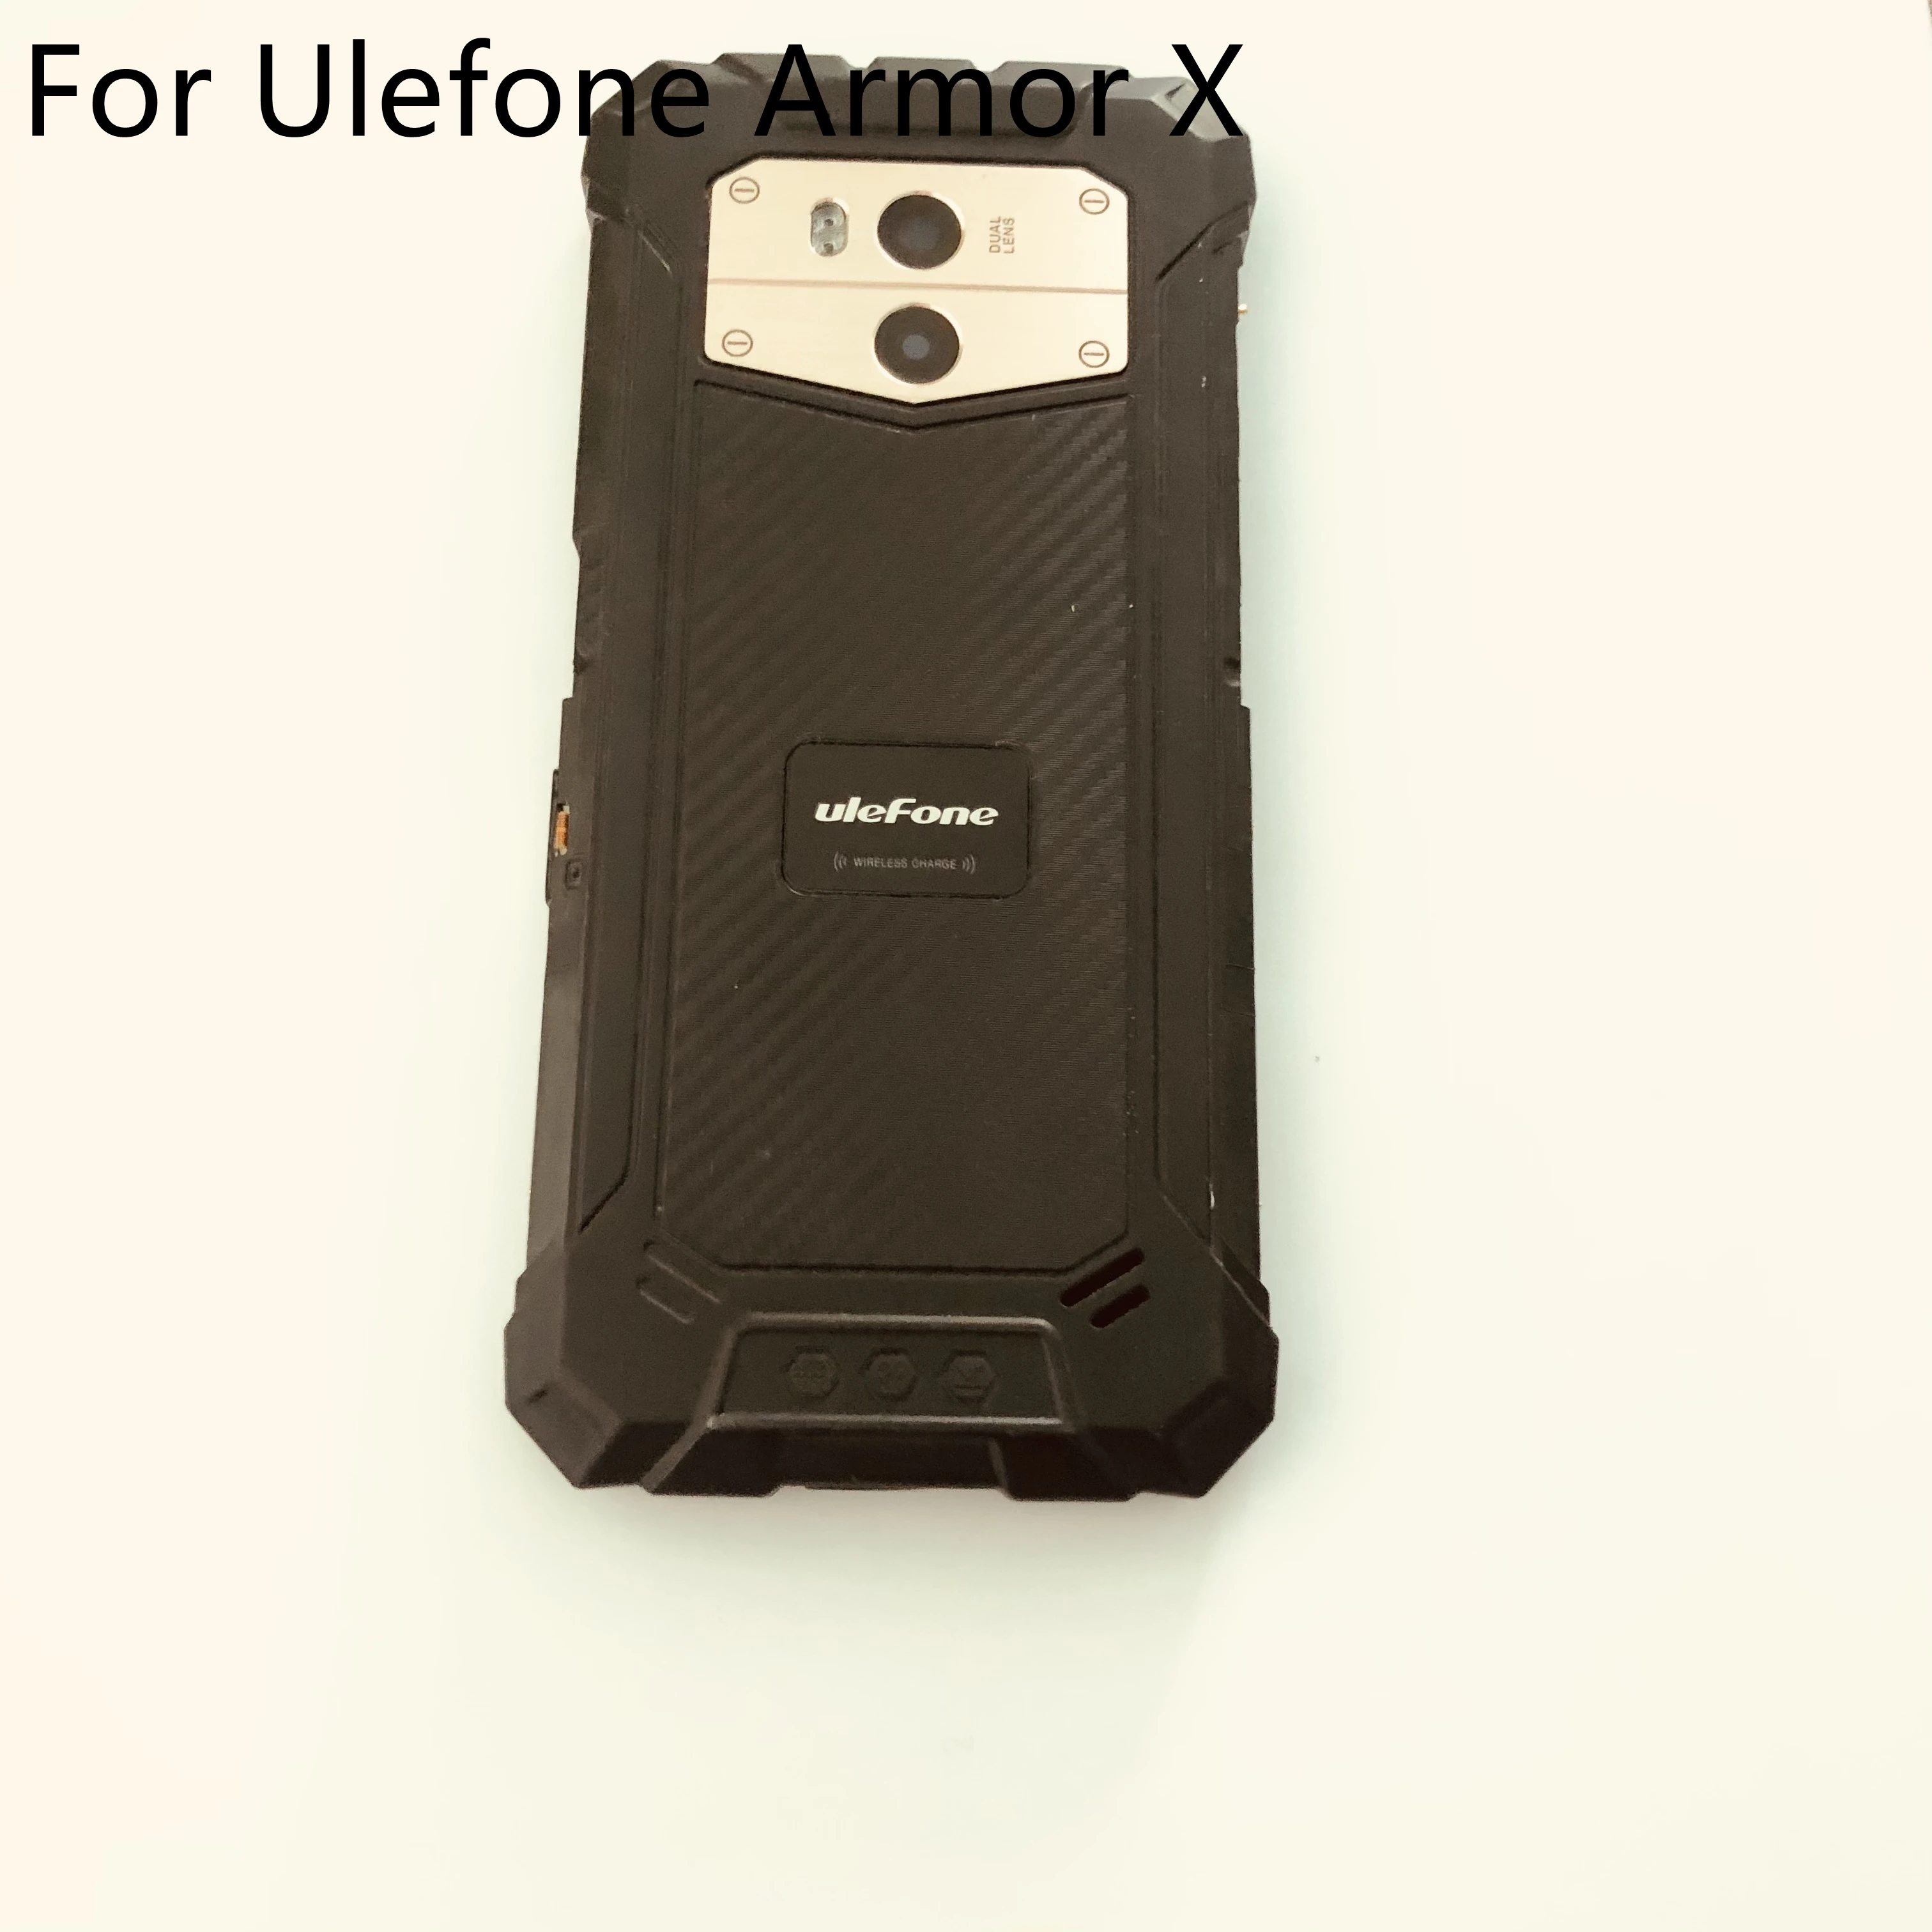 

Ulefone Armor X Used Battery Case Cover Back Shell + Camera Glass Lens For Ulefone Armor X MTK6739 5.5" 1440x720 Smartphone